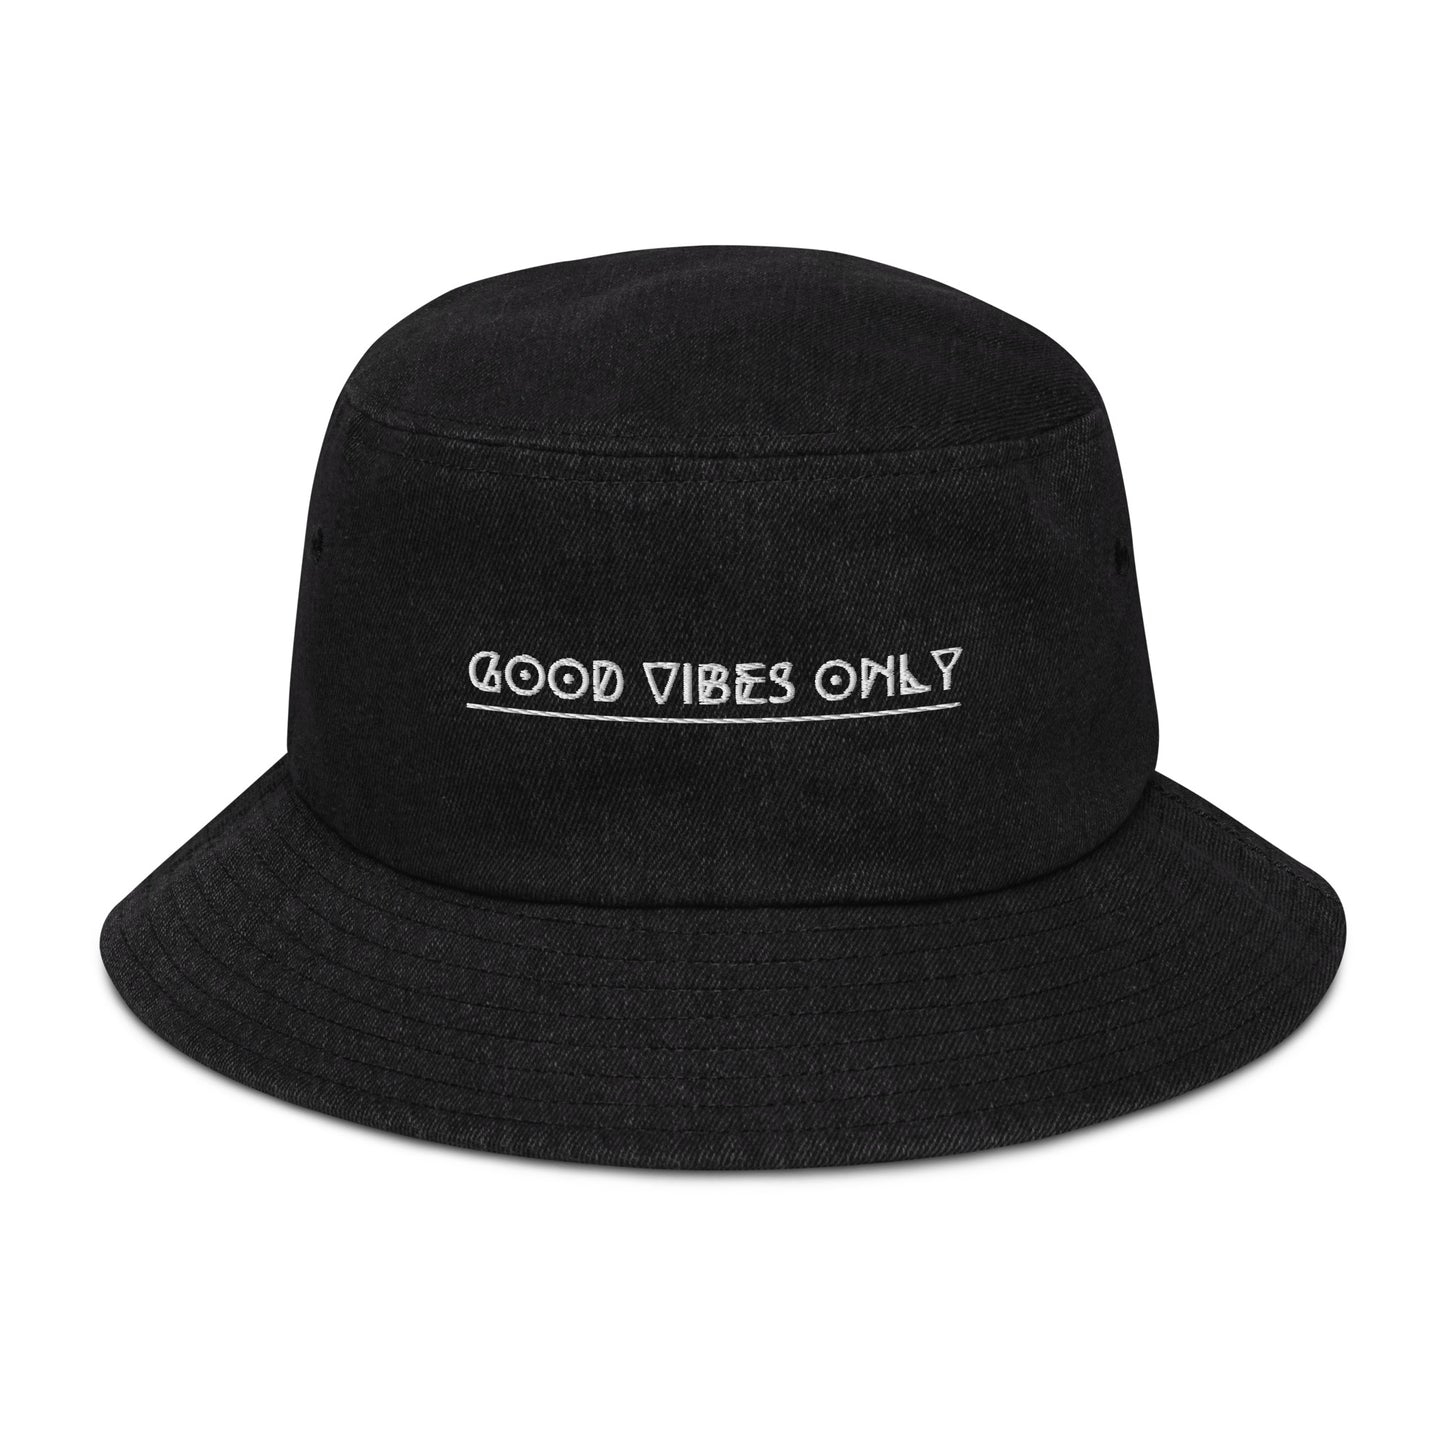 Good Vibes Only Bucket Hat - Black 